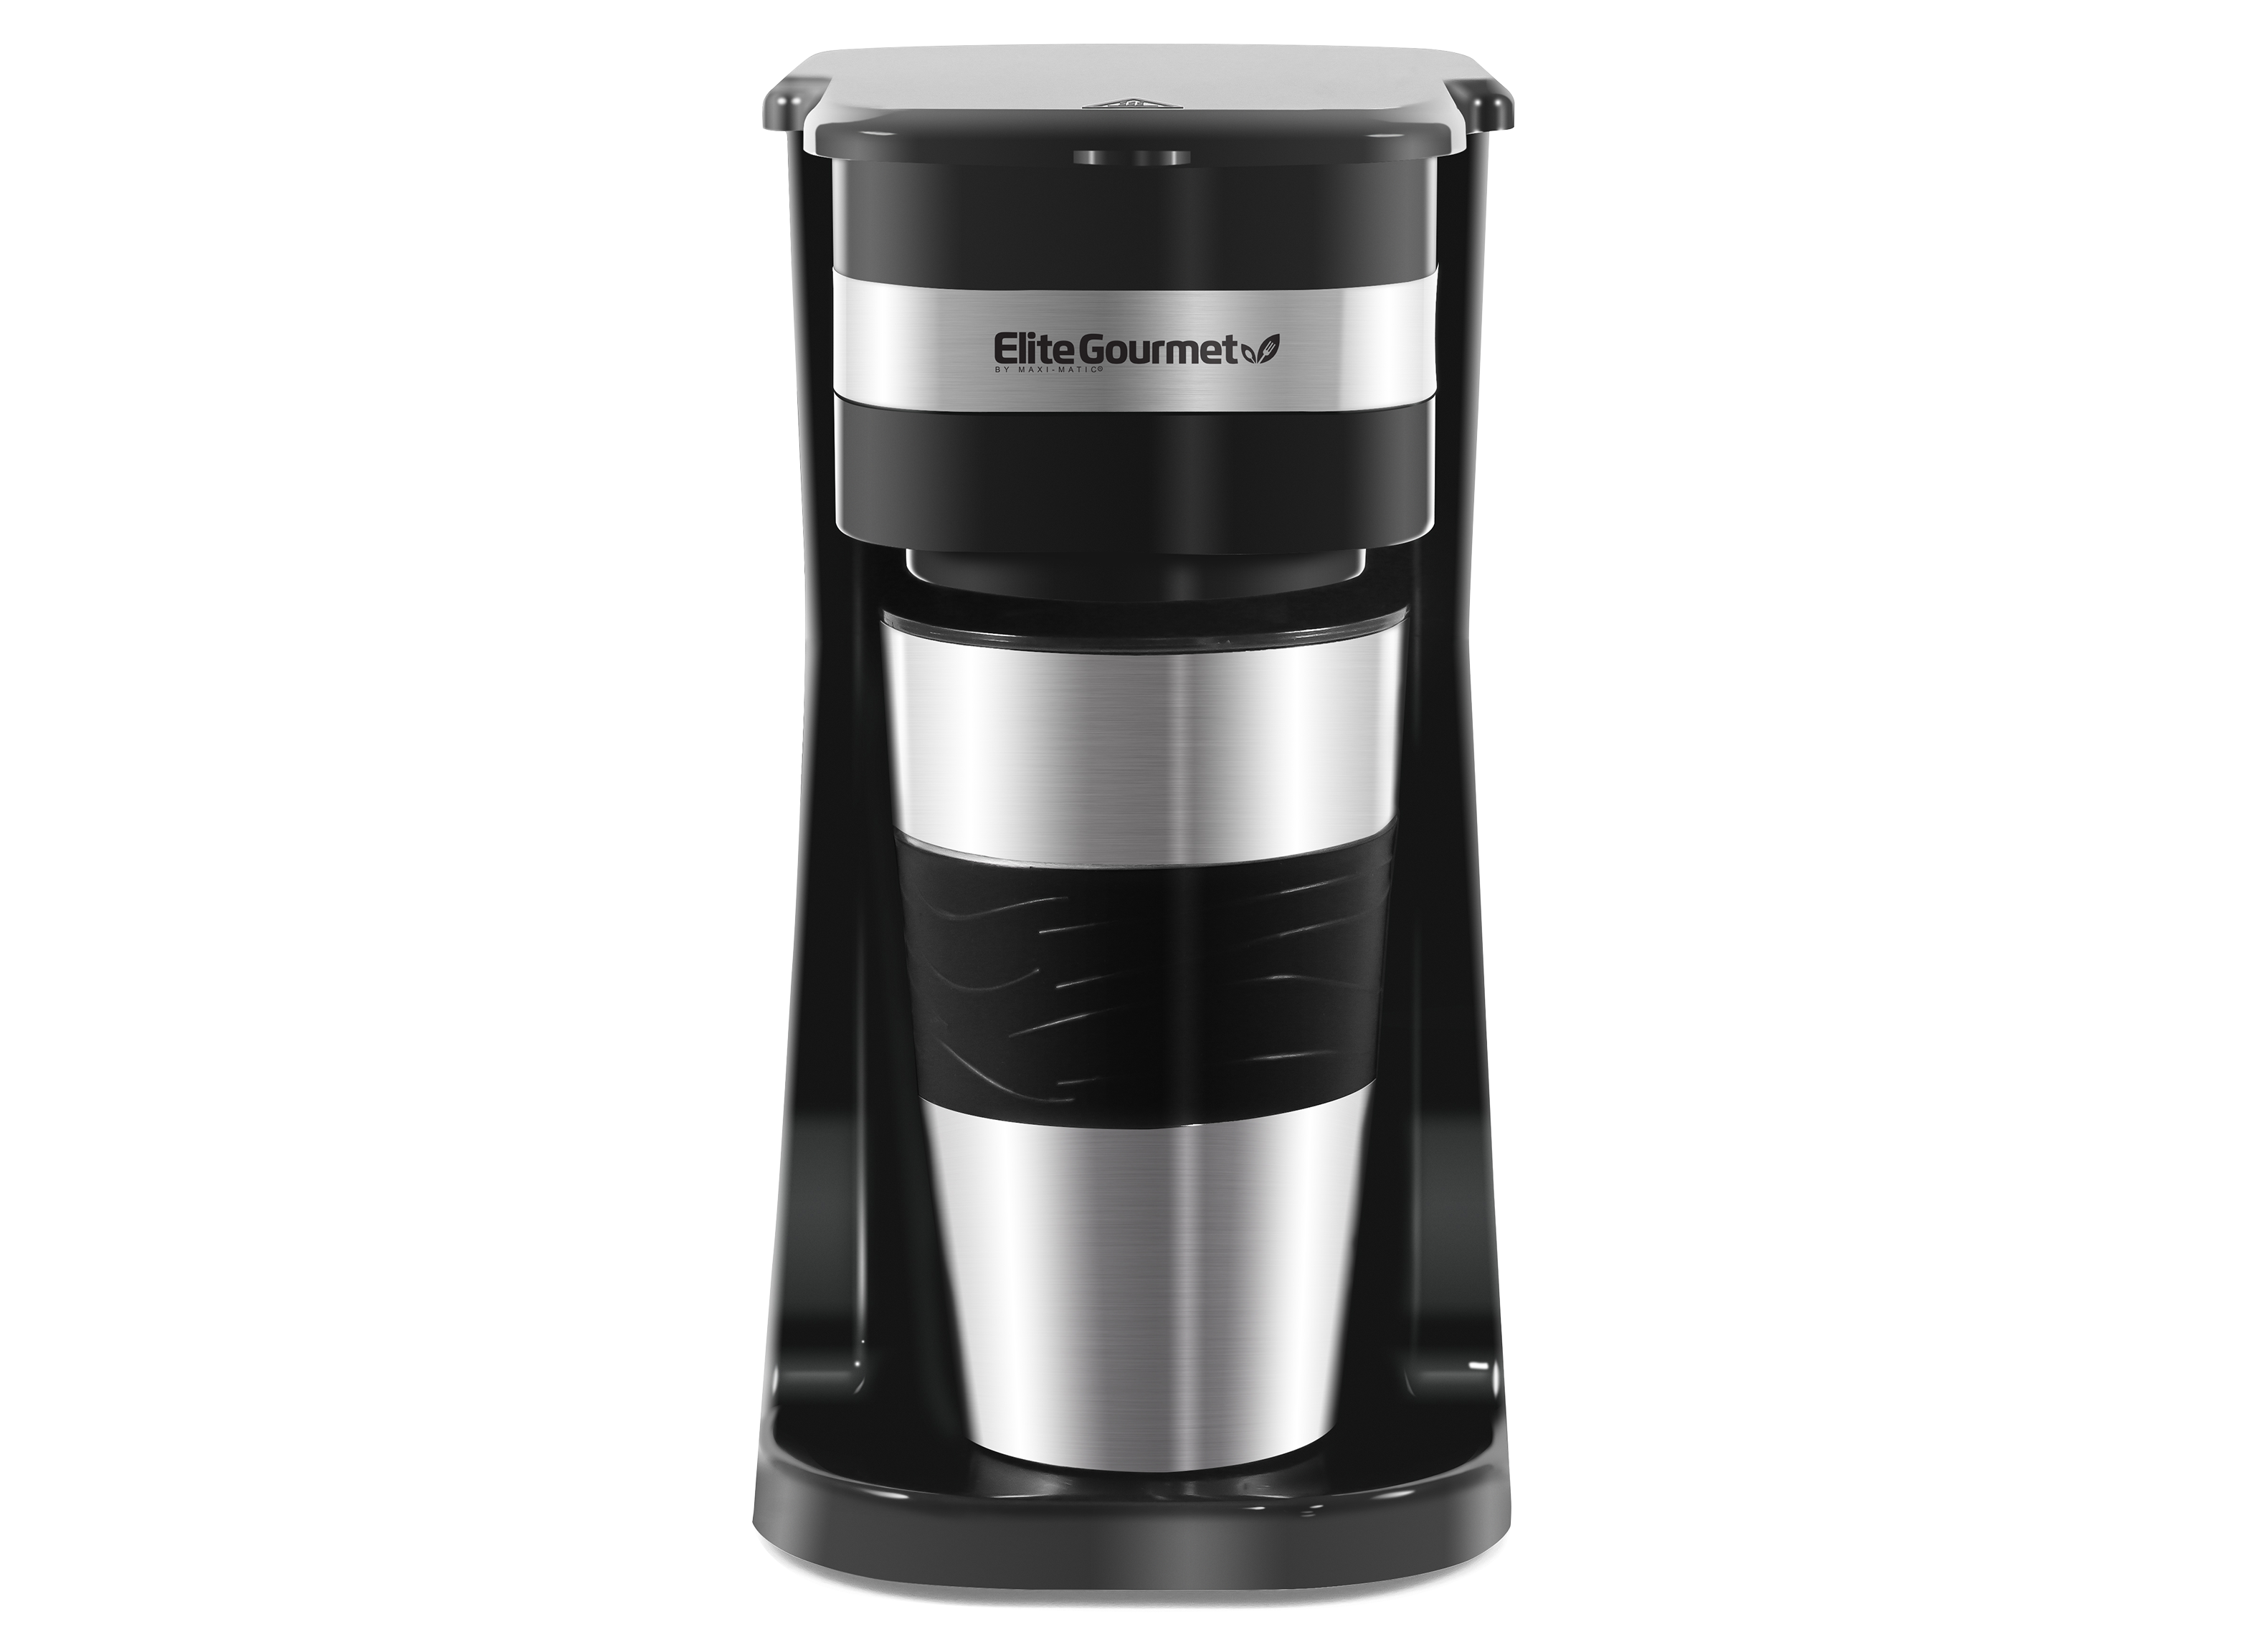 https://crdms.images.consumerreports.org/prod/products/cr/models/405714-one-or-two-mug-drip-coffee-makers-elite-gourmet-single-serve-w-travel-mug-ehc111a-10027234.png